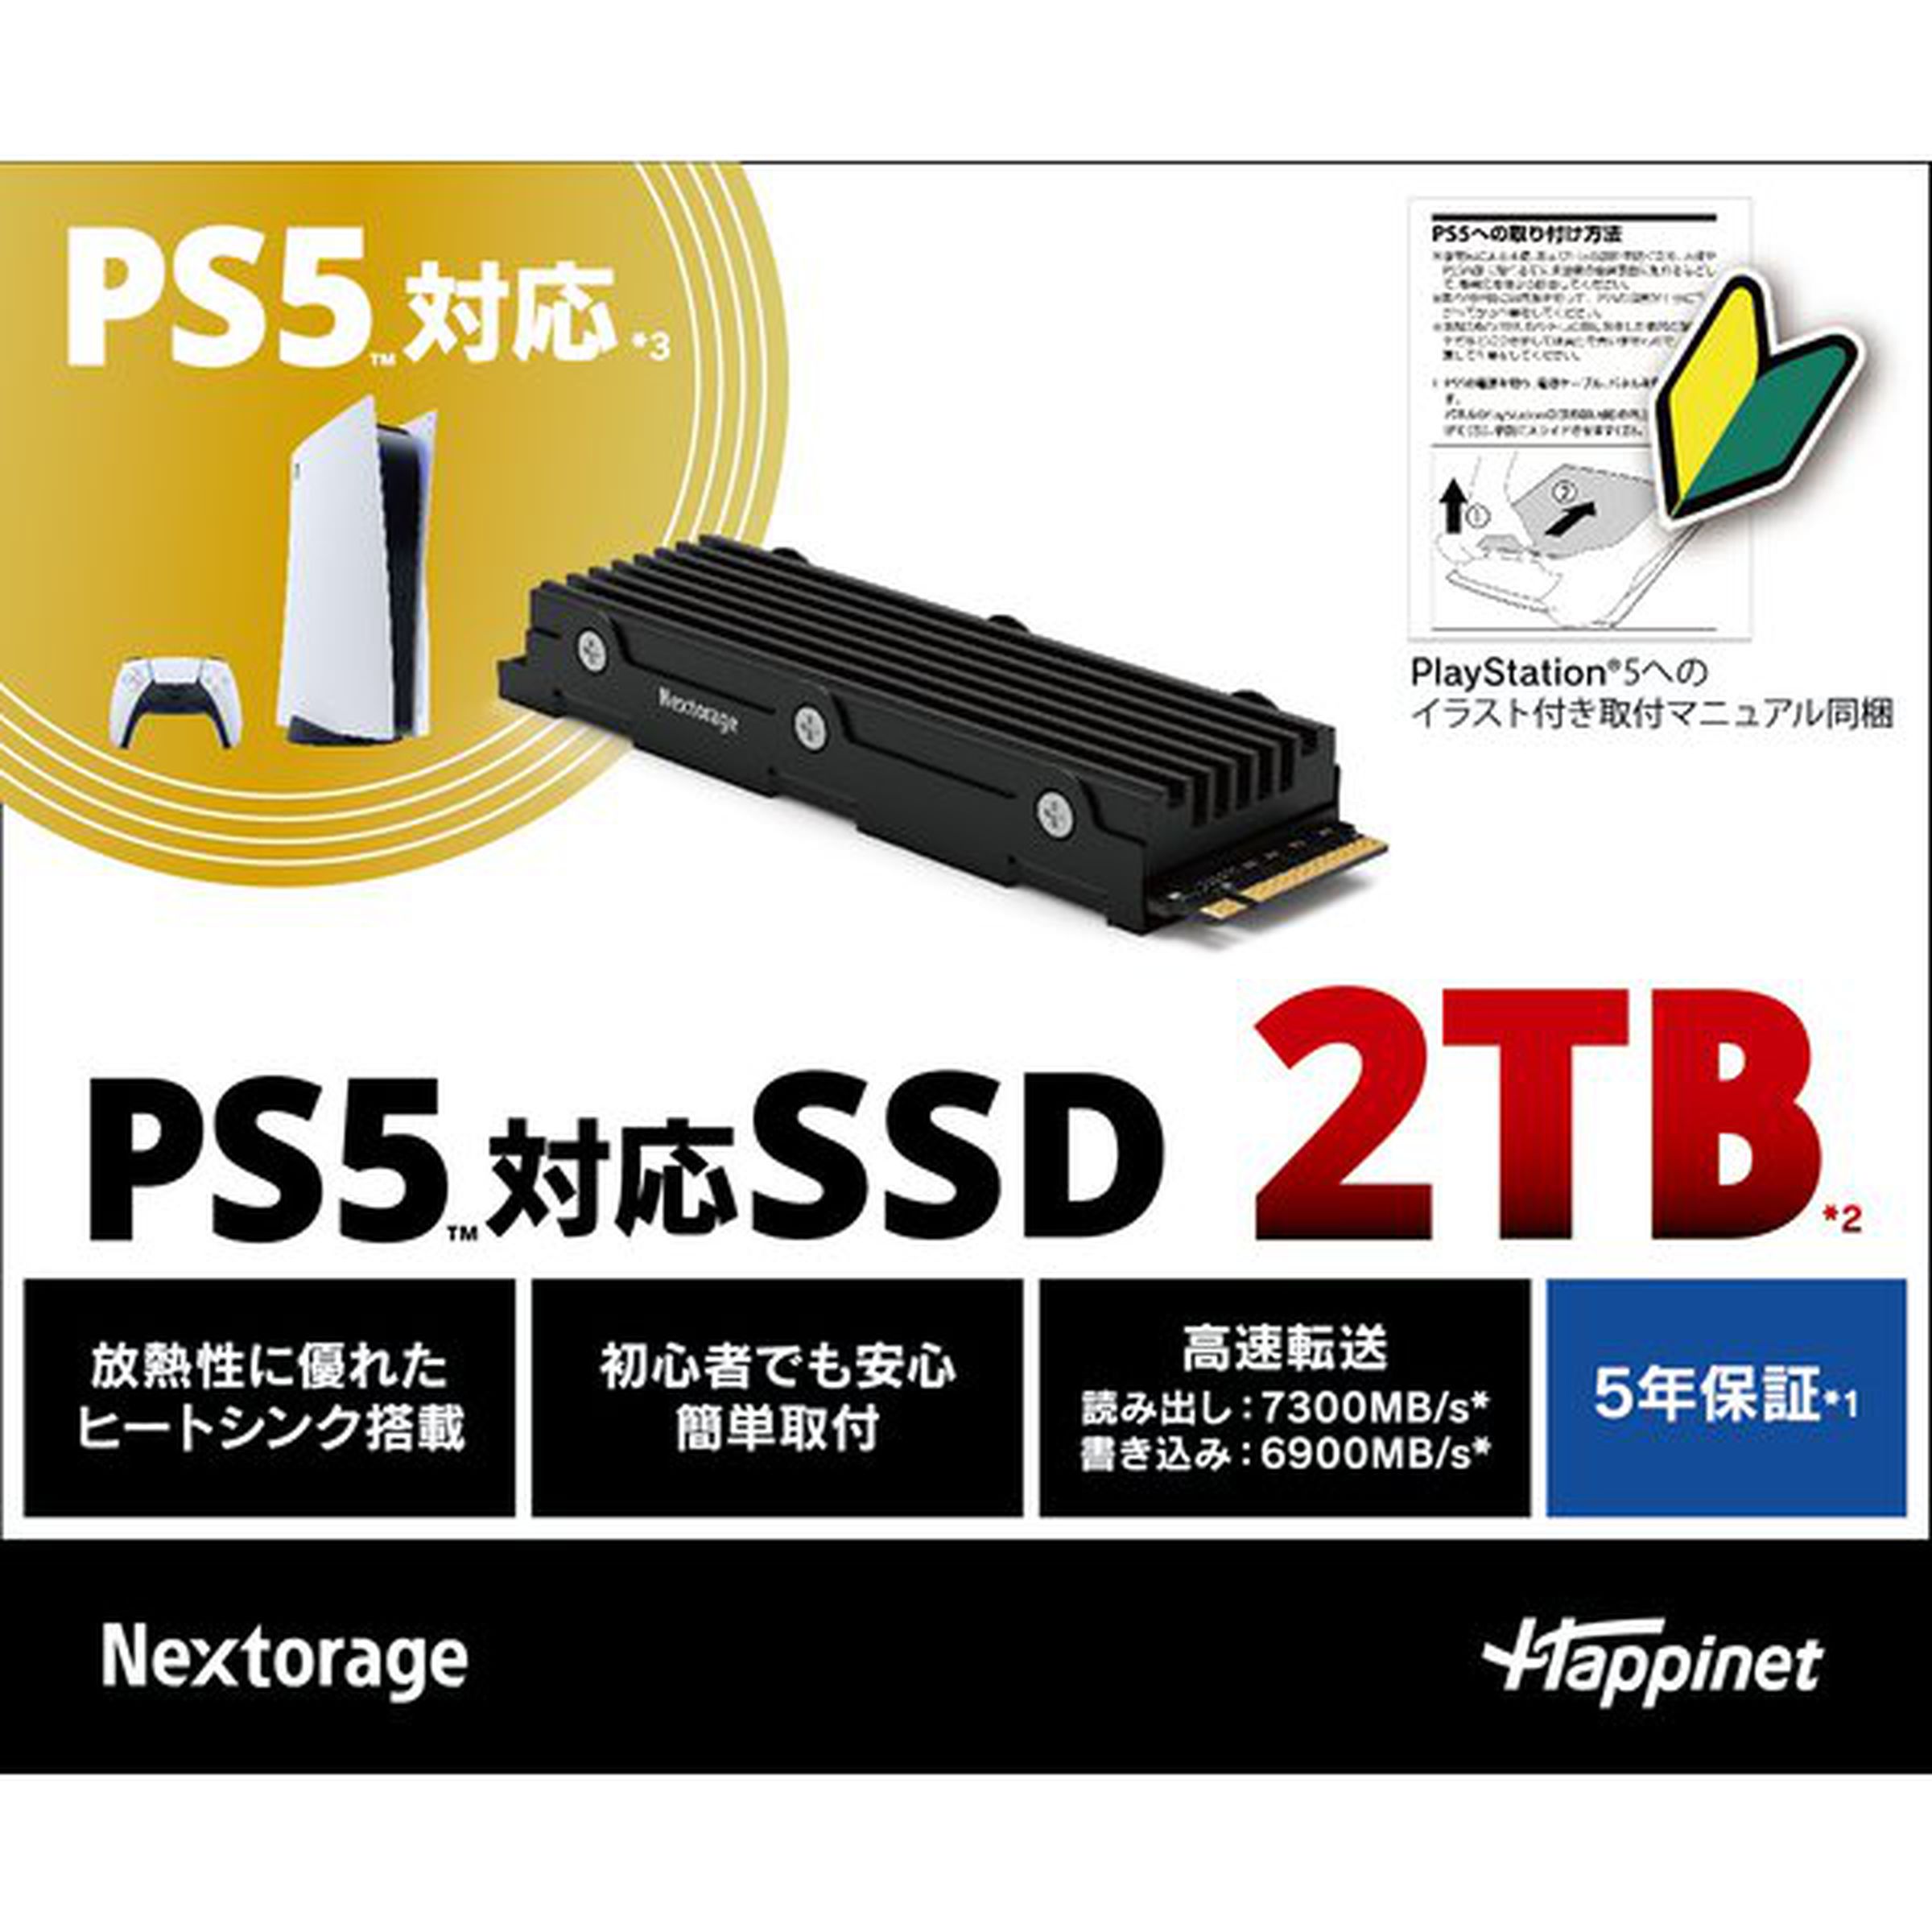 This is one of two product images on the Yodobashi store. If you look closely, you can see a PS5 reference.